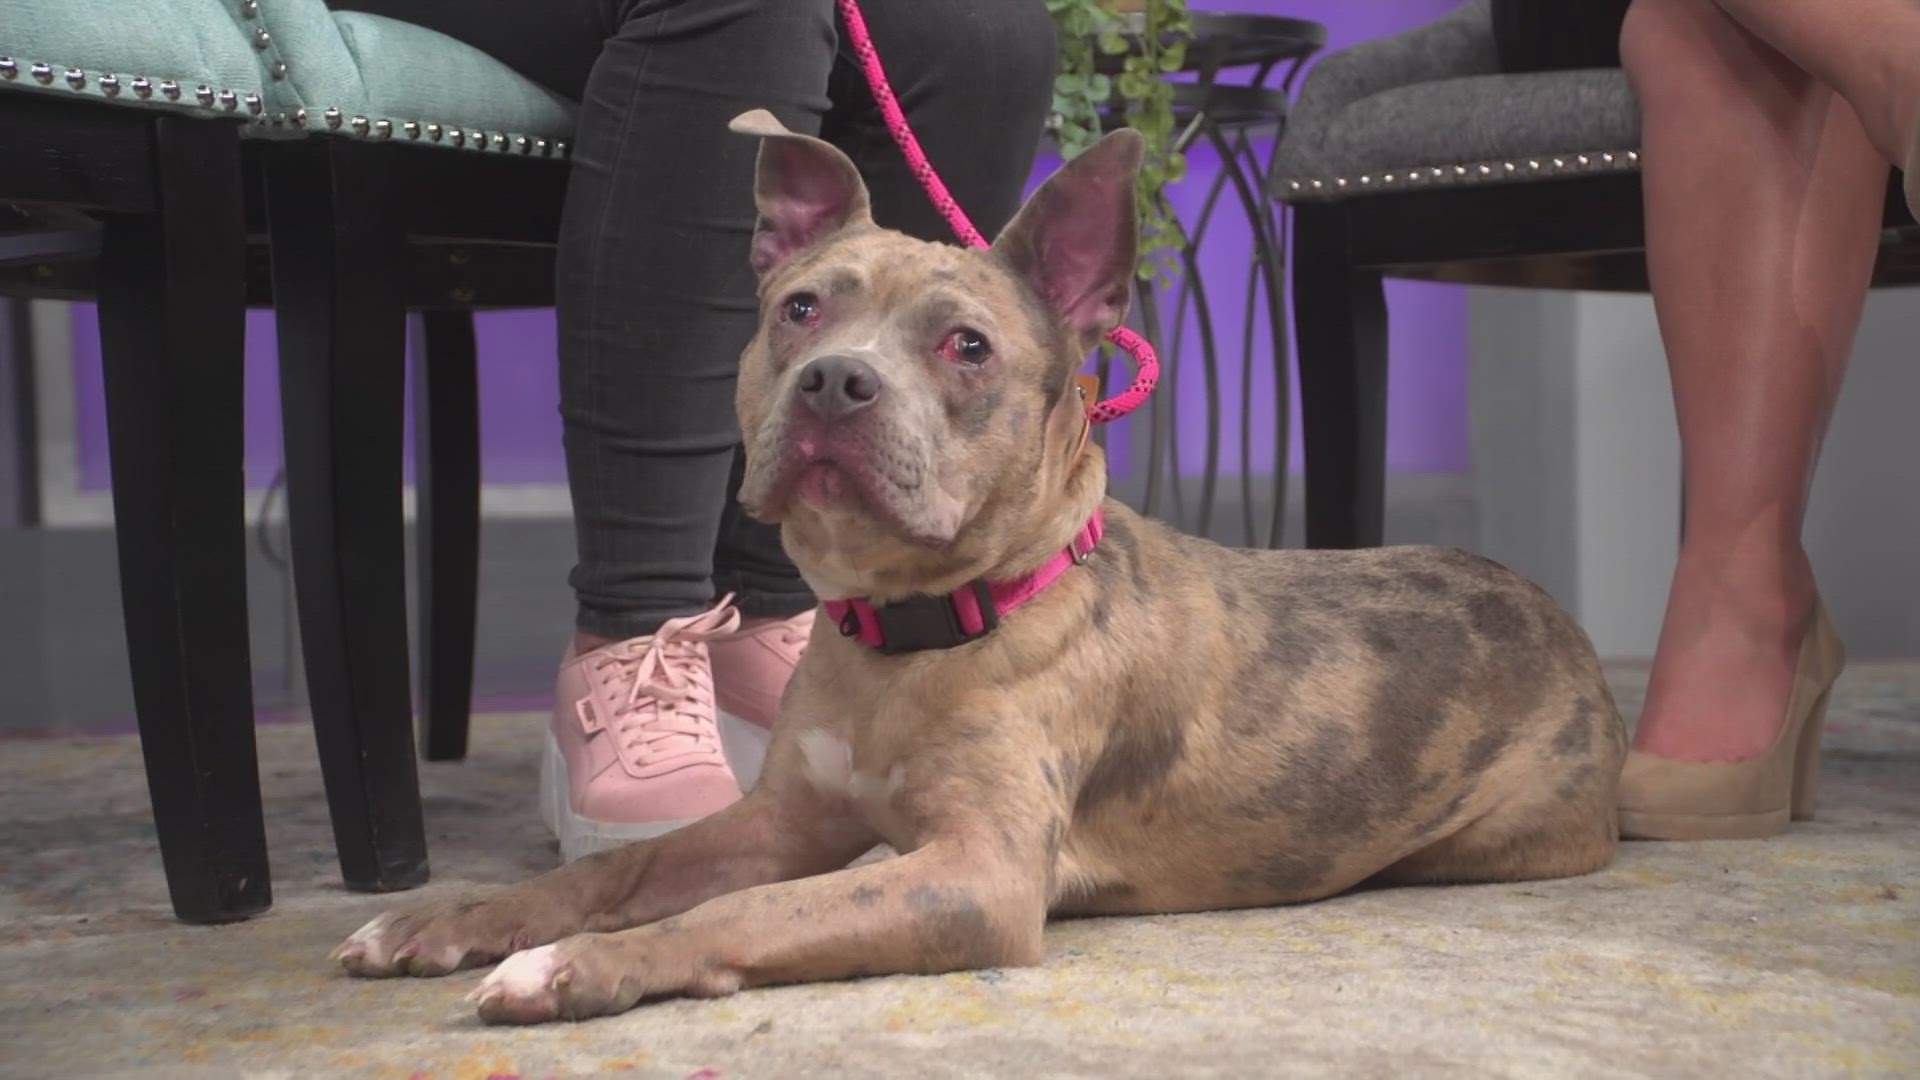 Fiona is available for adoption from Pound Pitties Dog Rescue in Sheridan.